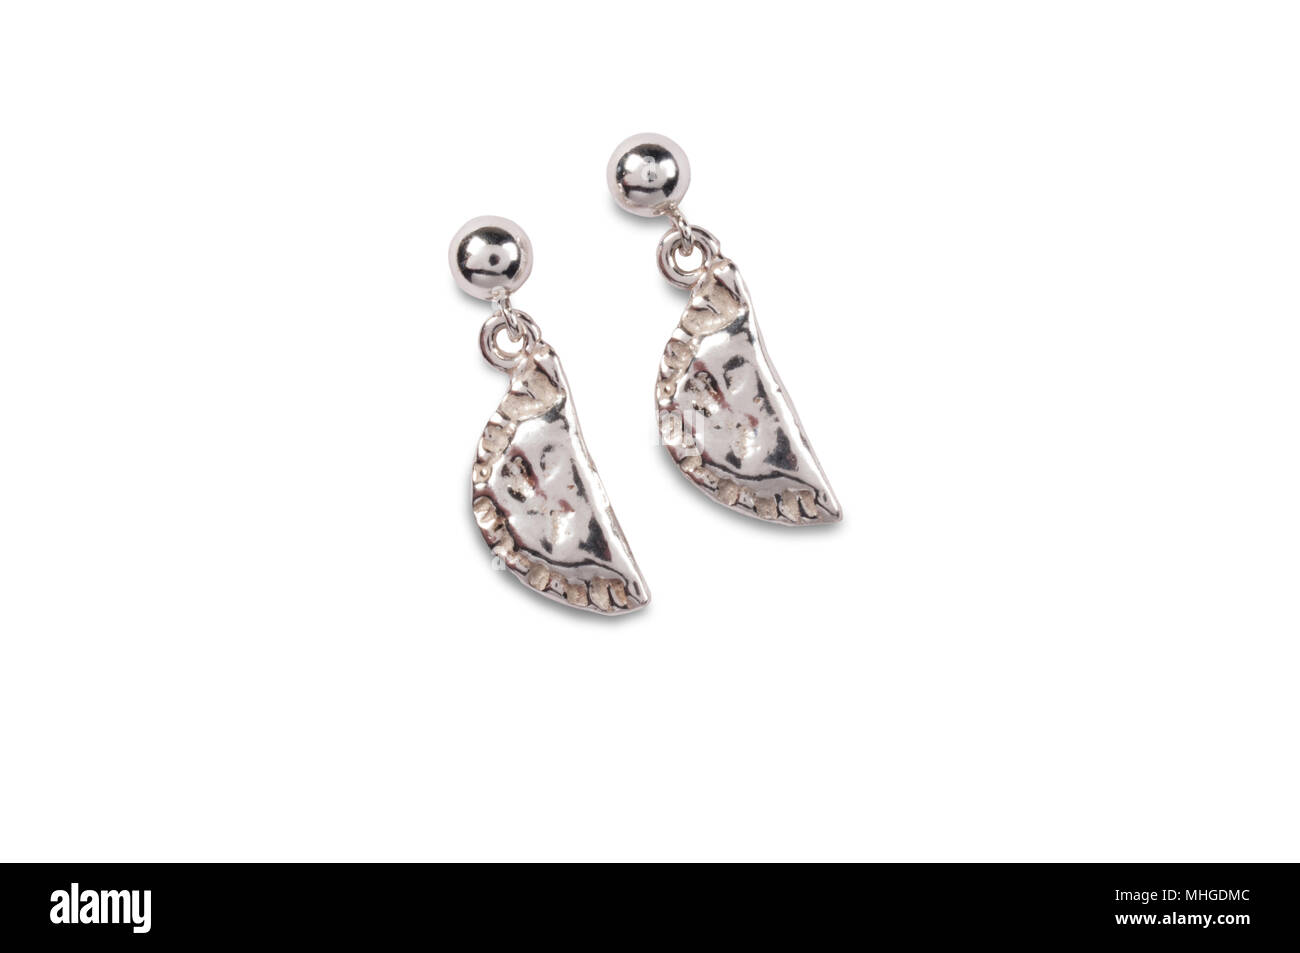 studio shot of a pair of pasty shaped earrings isolated on white - John Gollop Stock Photo